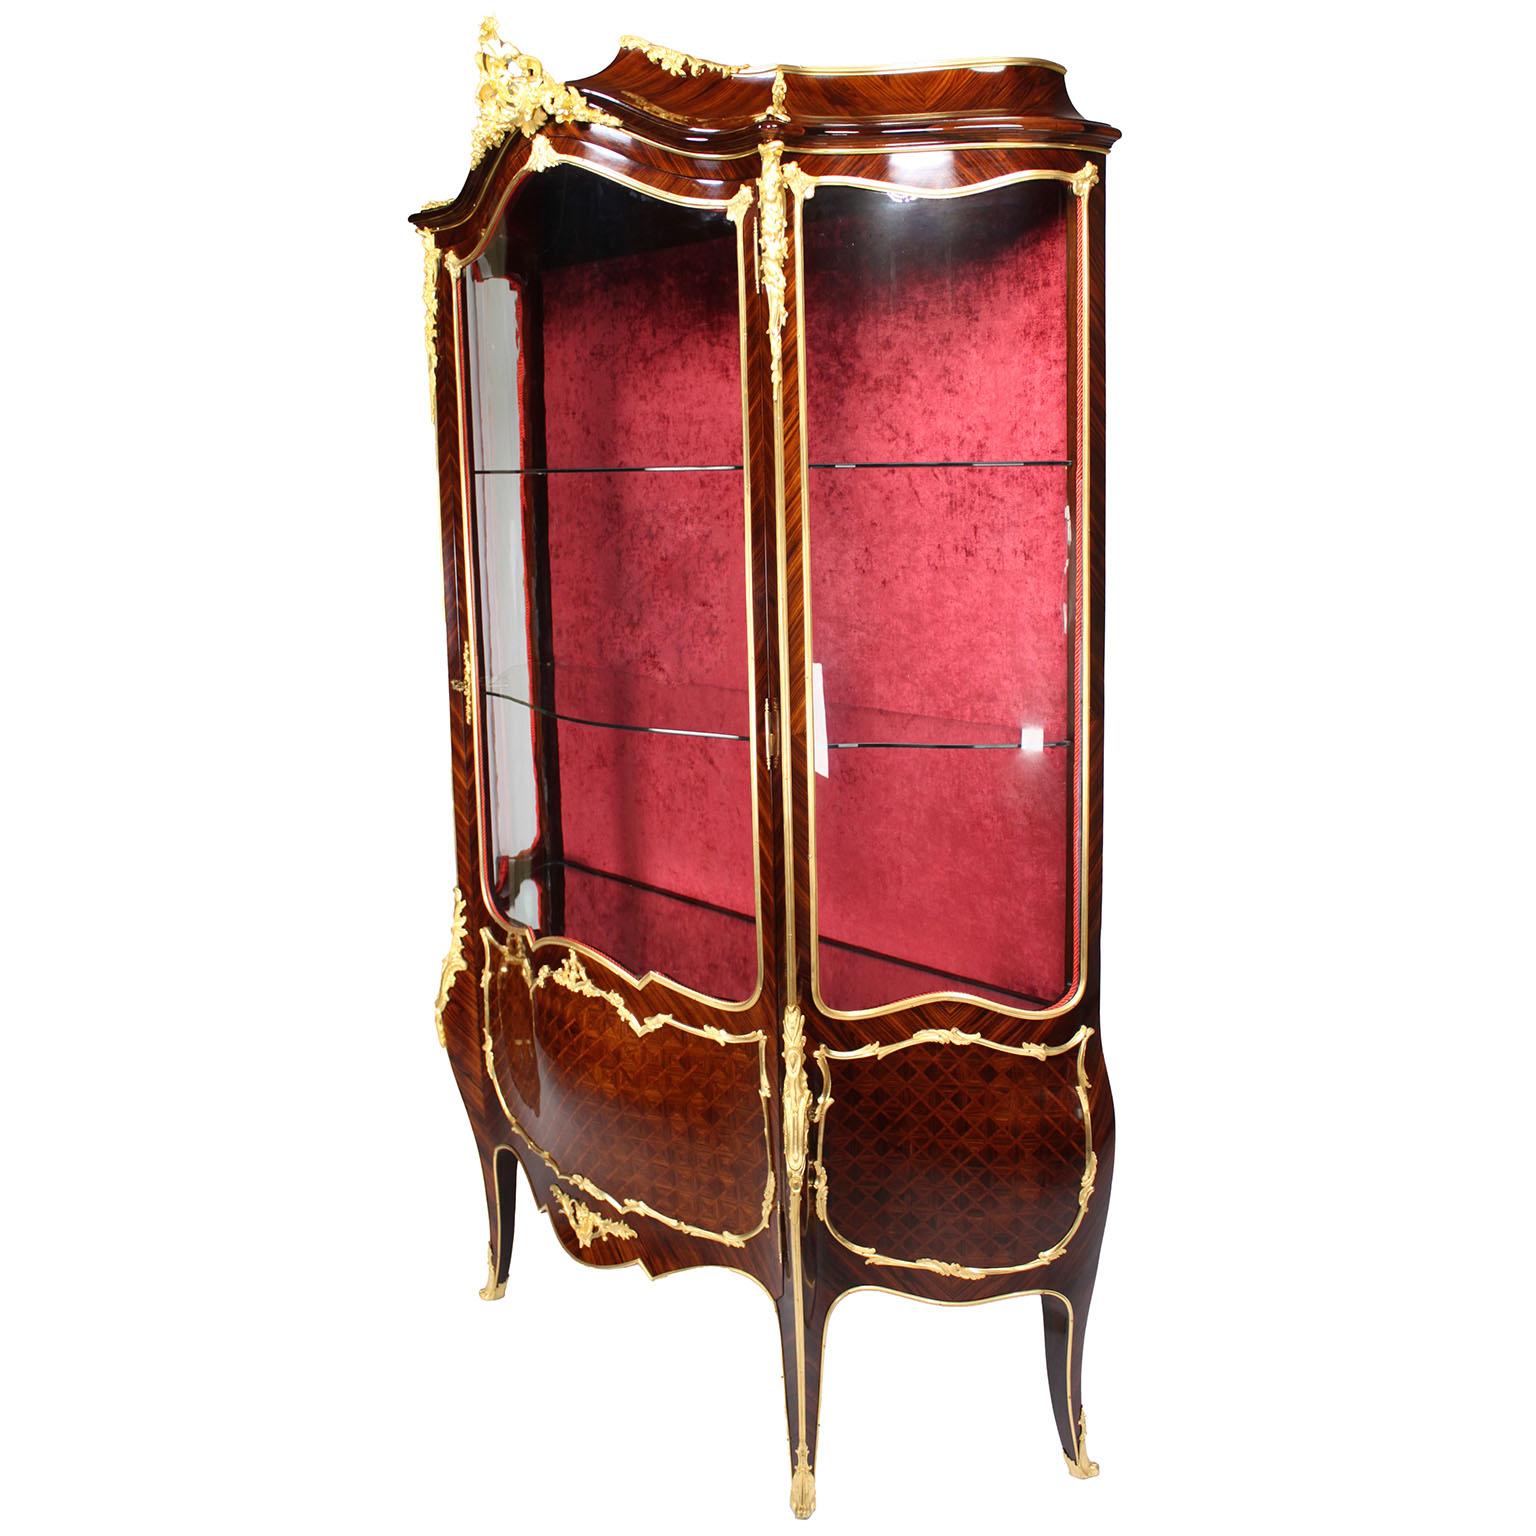 A Very Fine French 19th Century Louis XV Style 'Belle Époque' Ormolu Mounted and Kingwood Parquetry Single-Door Bombé Vitrine Display Cabinet,  by Alexandre Hugnet (French, active late 19th century), in the manner of François Linke (1855-1946). The